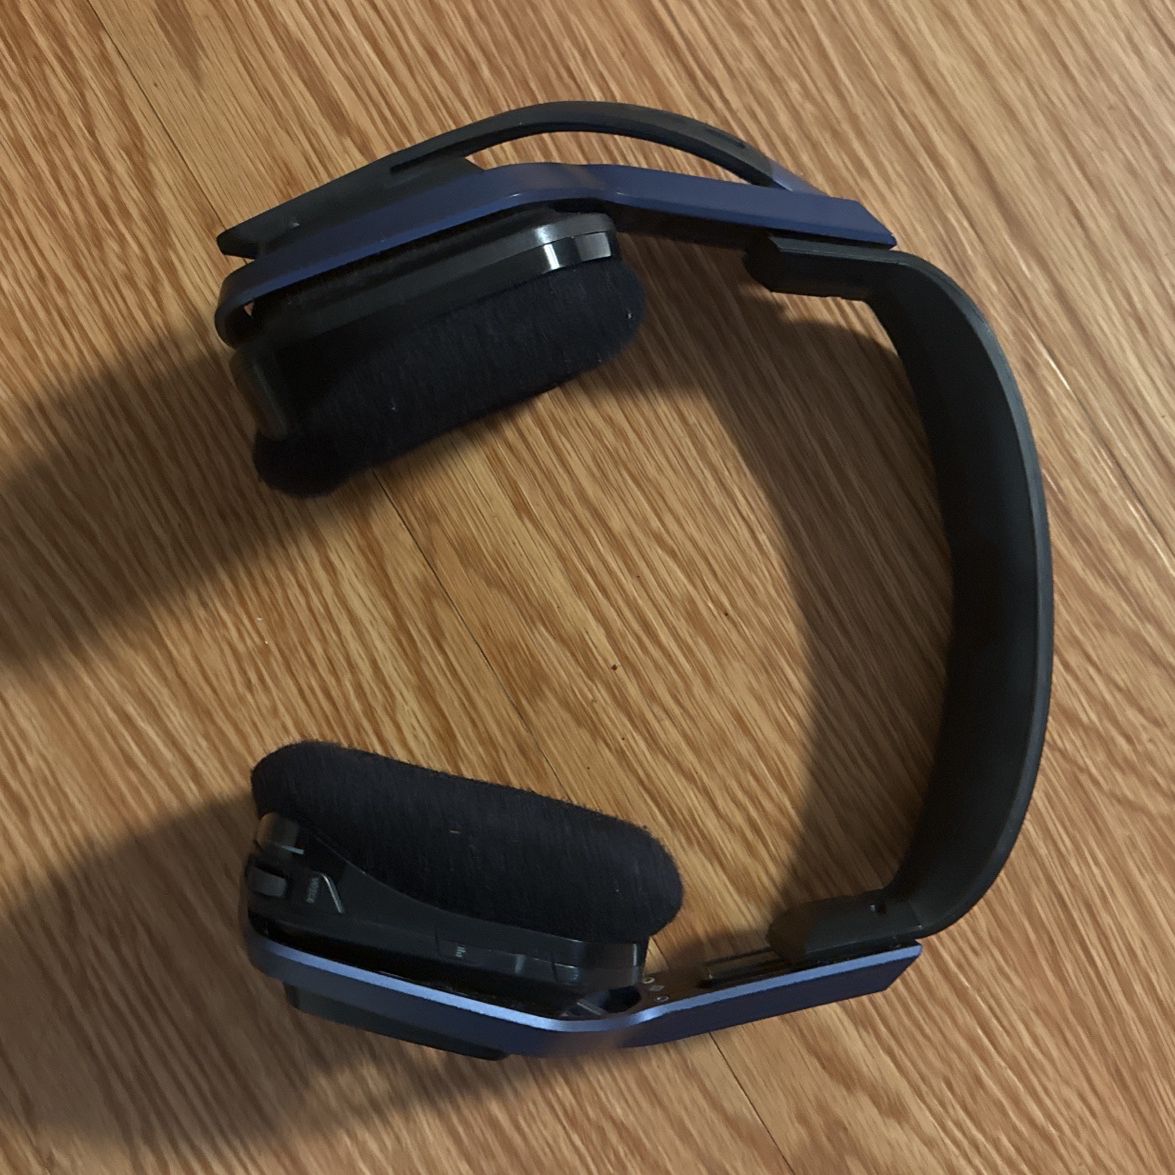 A20 Call Of Duty Wireless Headset